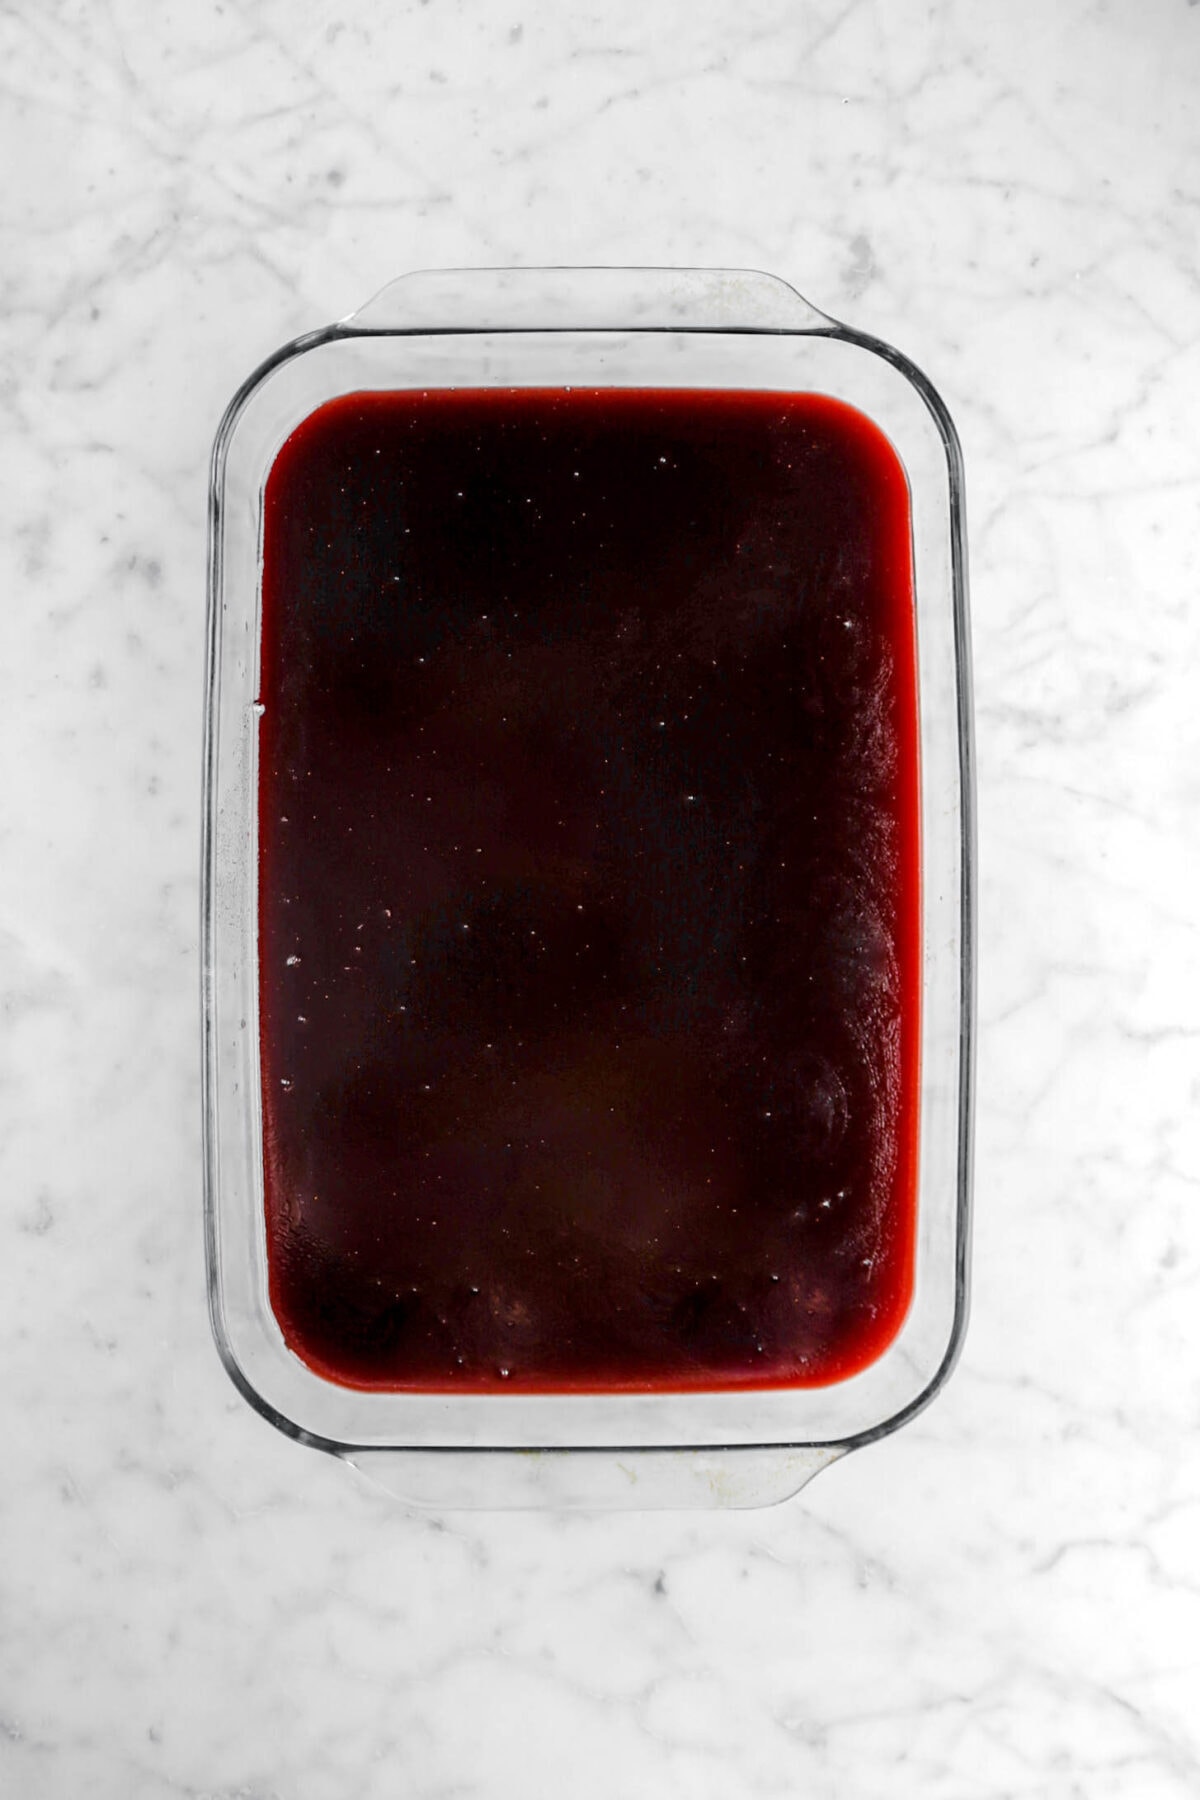 set jelly in large glass casserole.